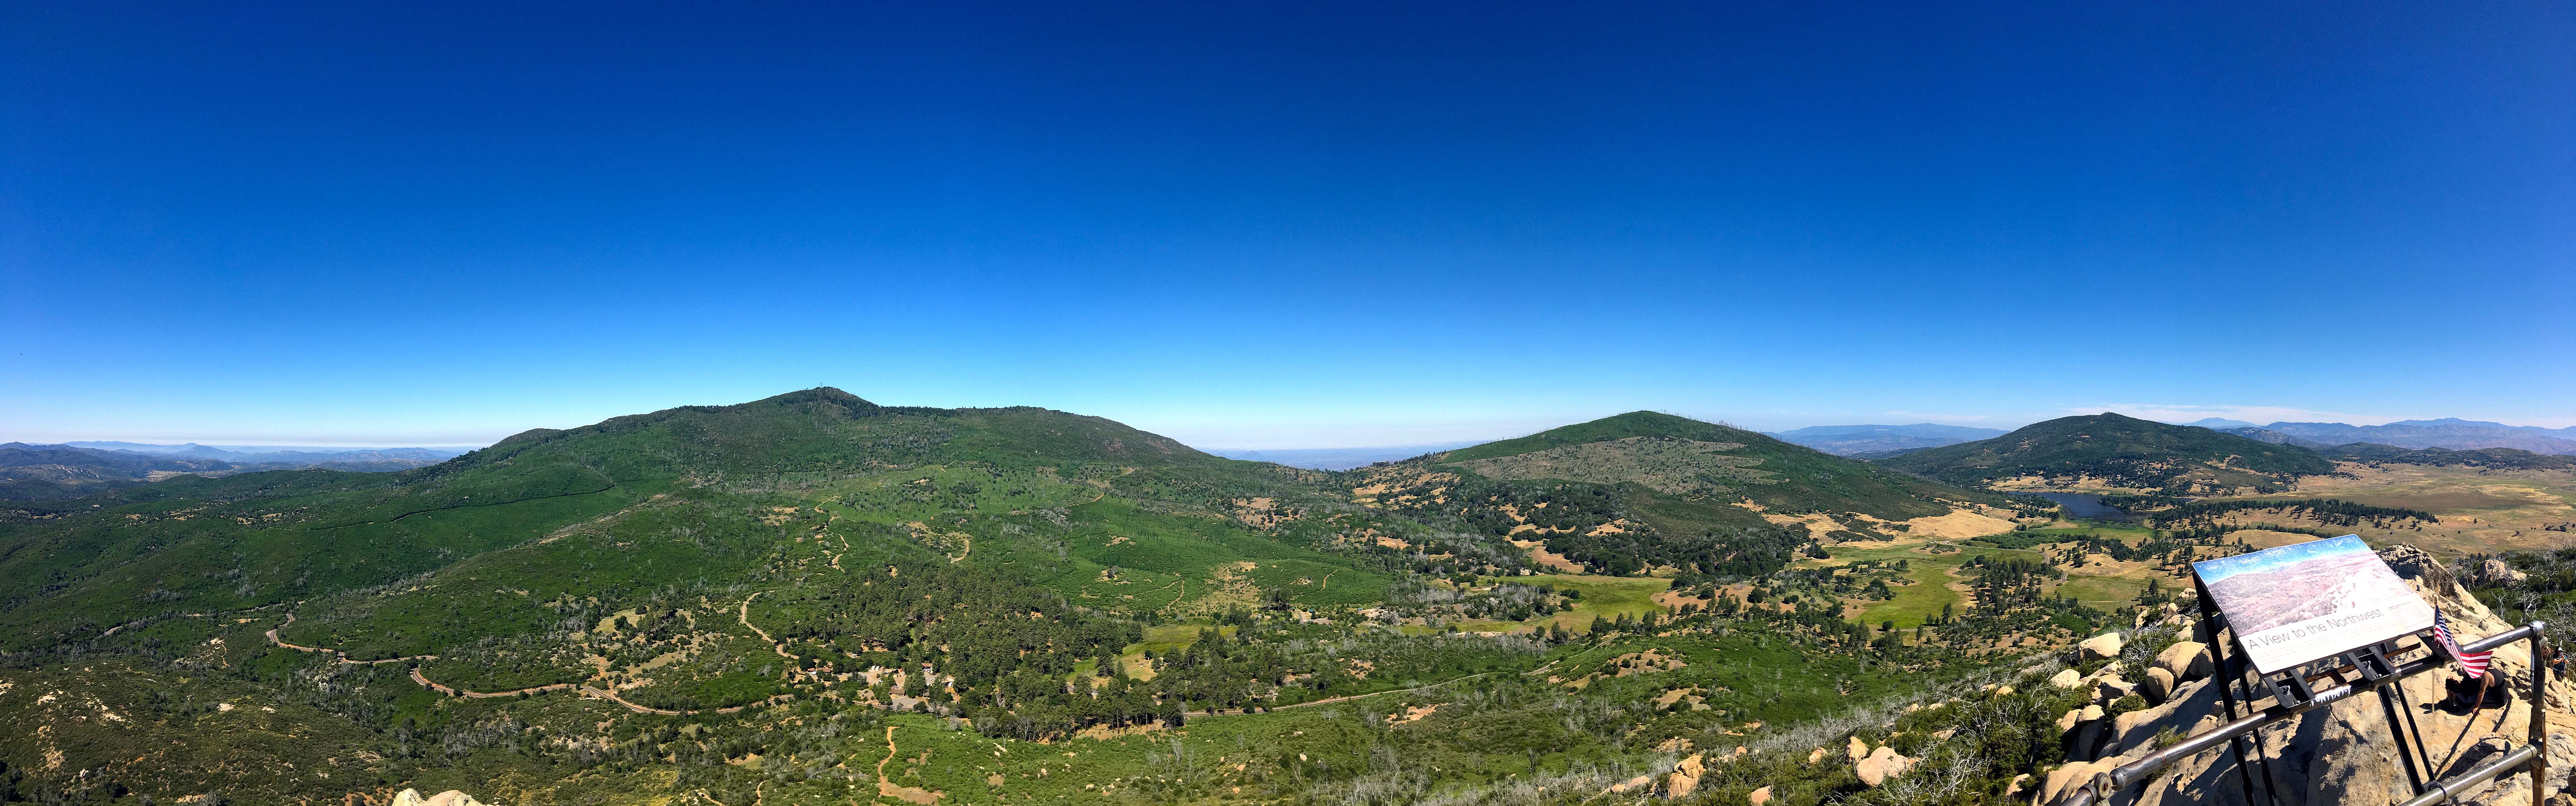 Cuyamaca, Middle and North Peaks